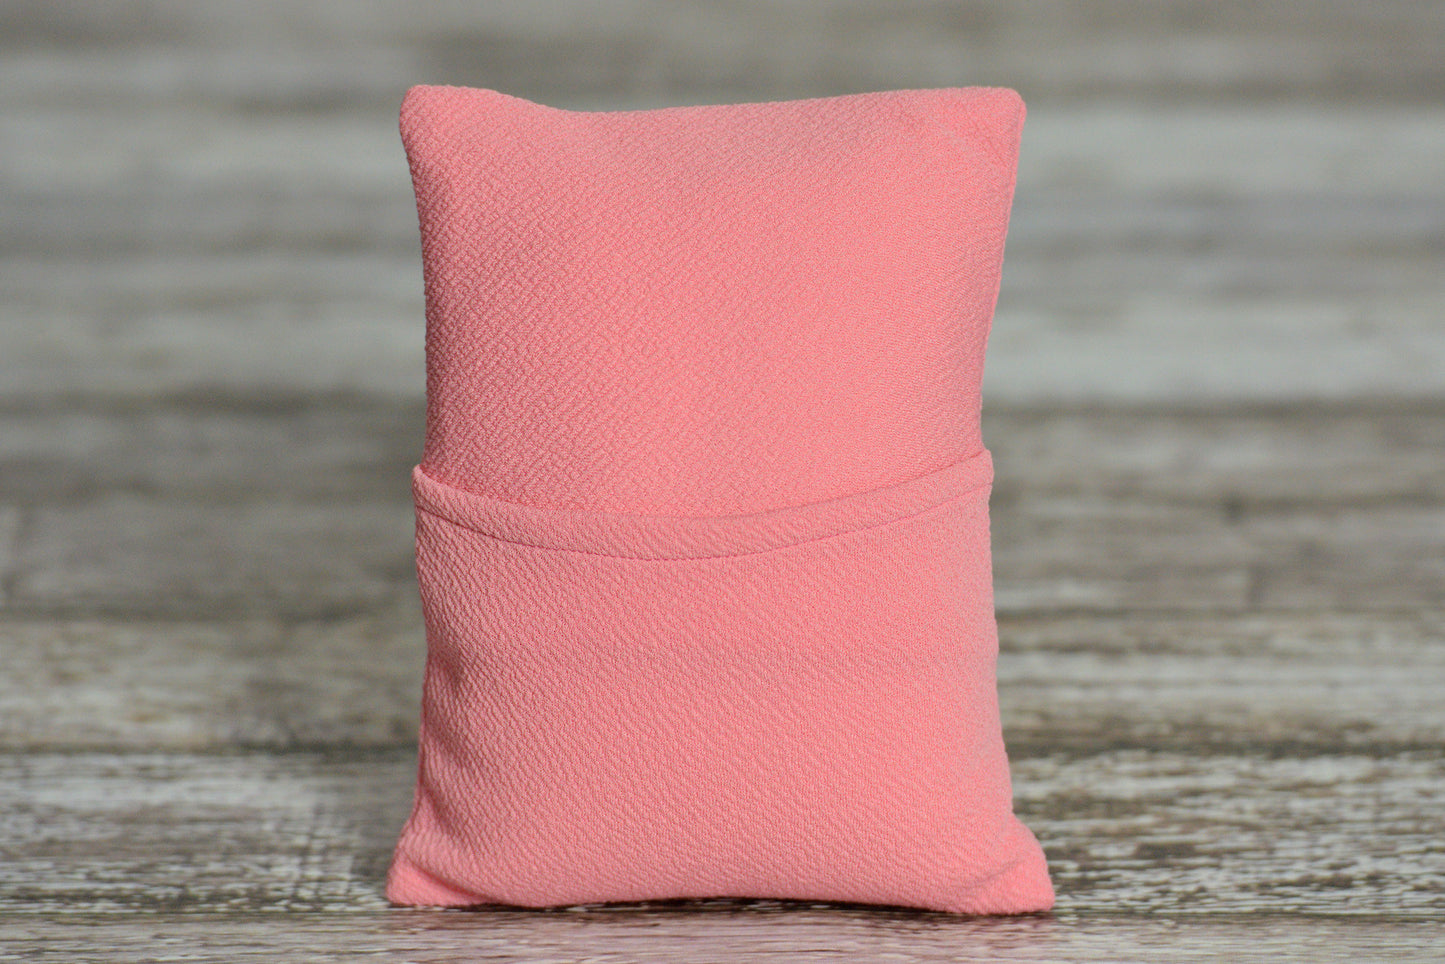 Mini Pillow with Cover - Textured - Rose-Newborn Photography Props